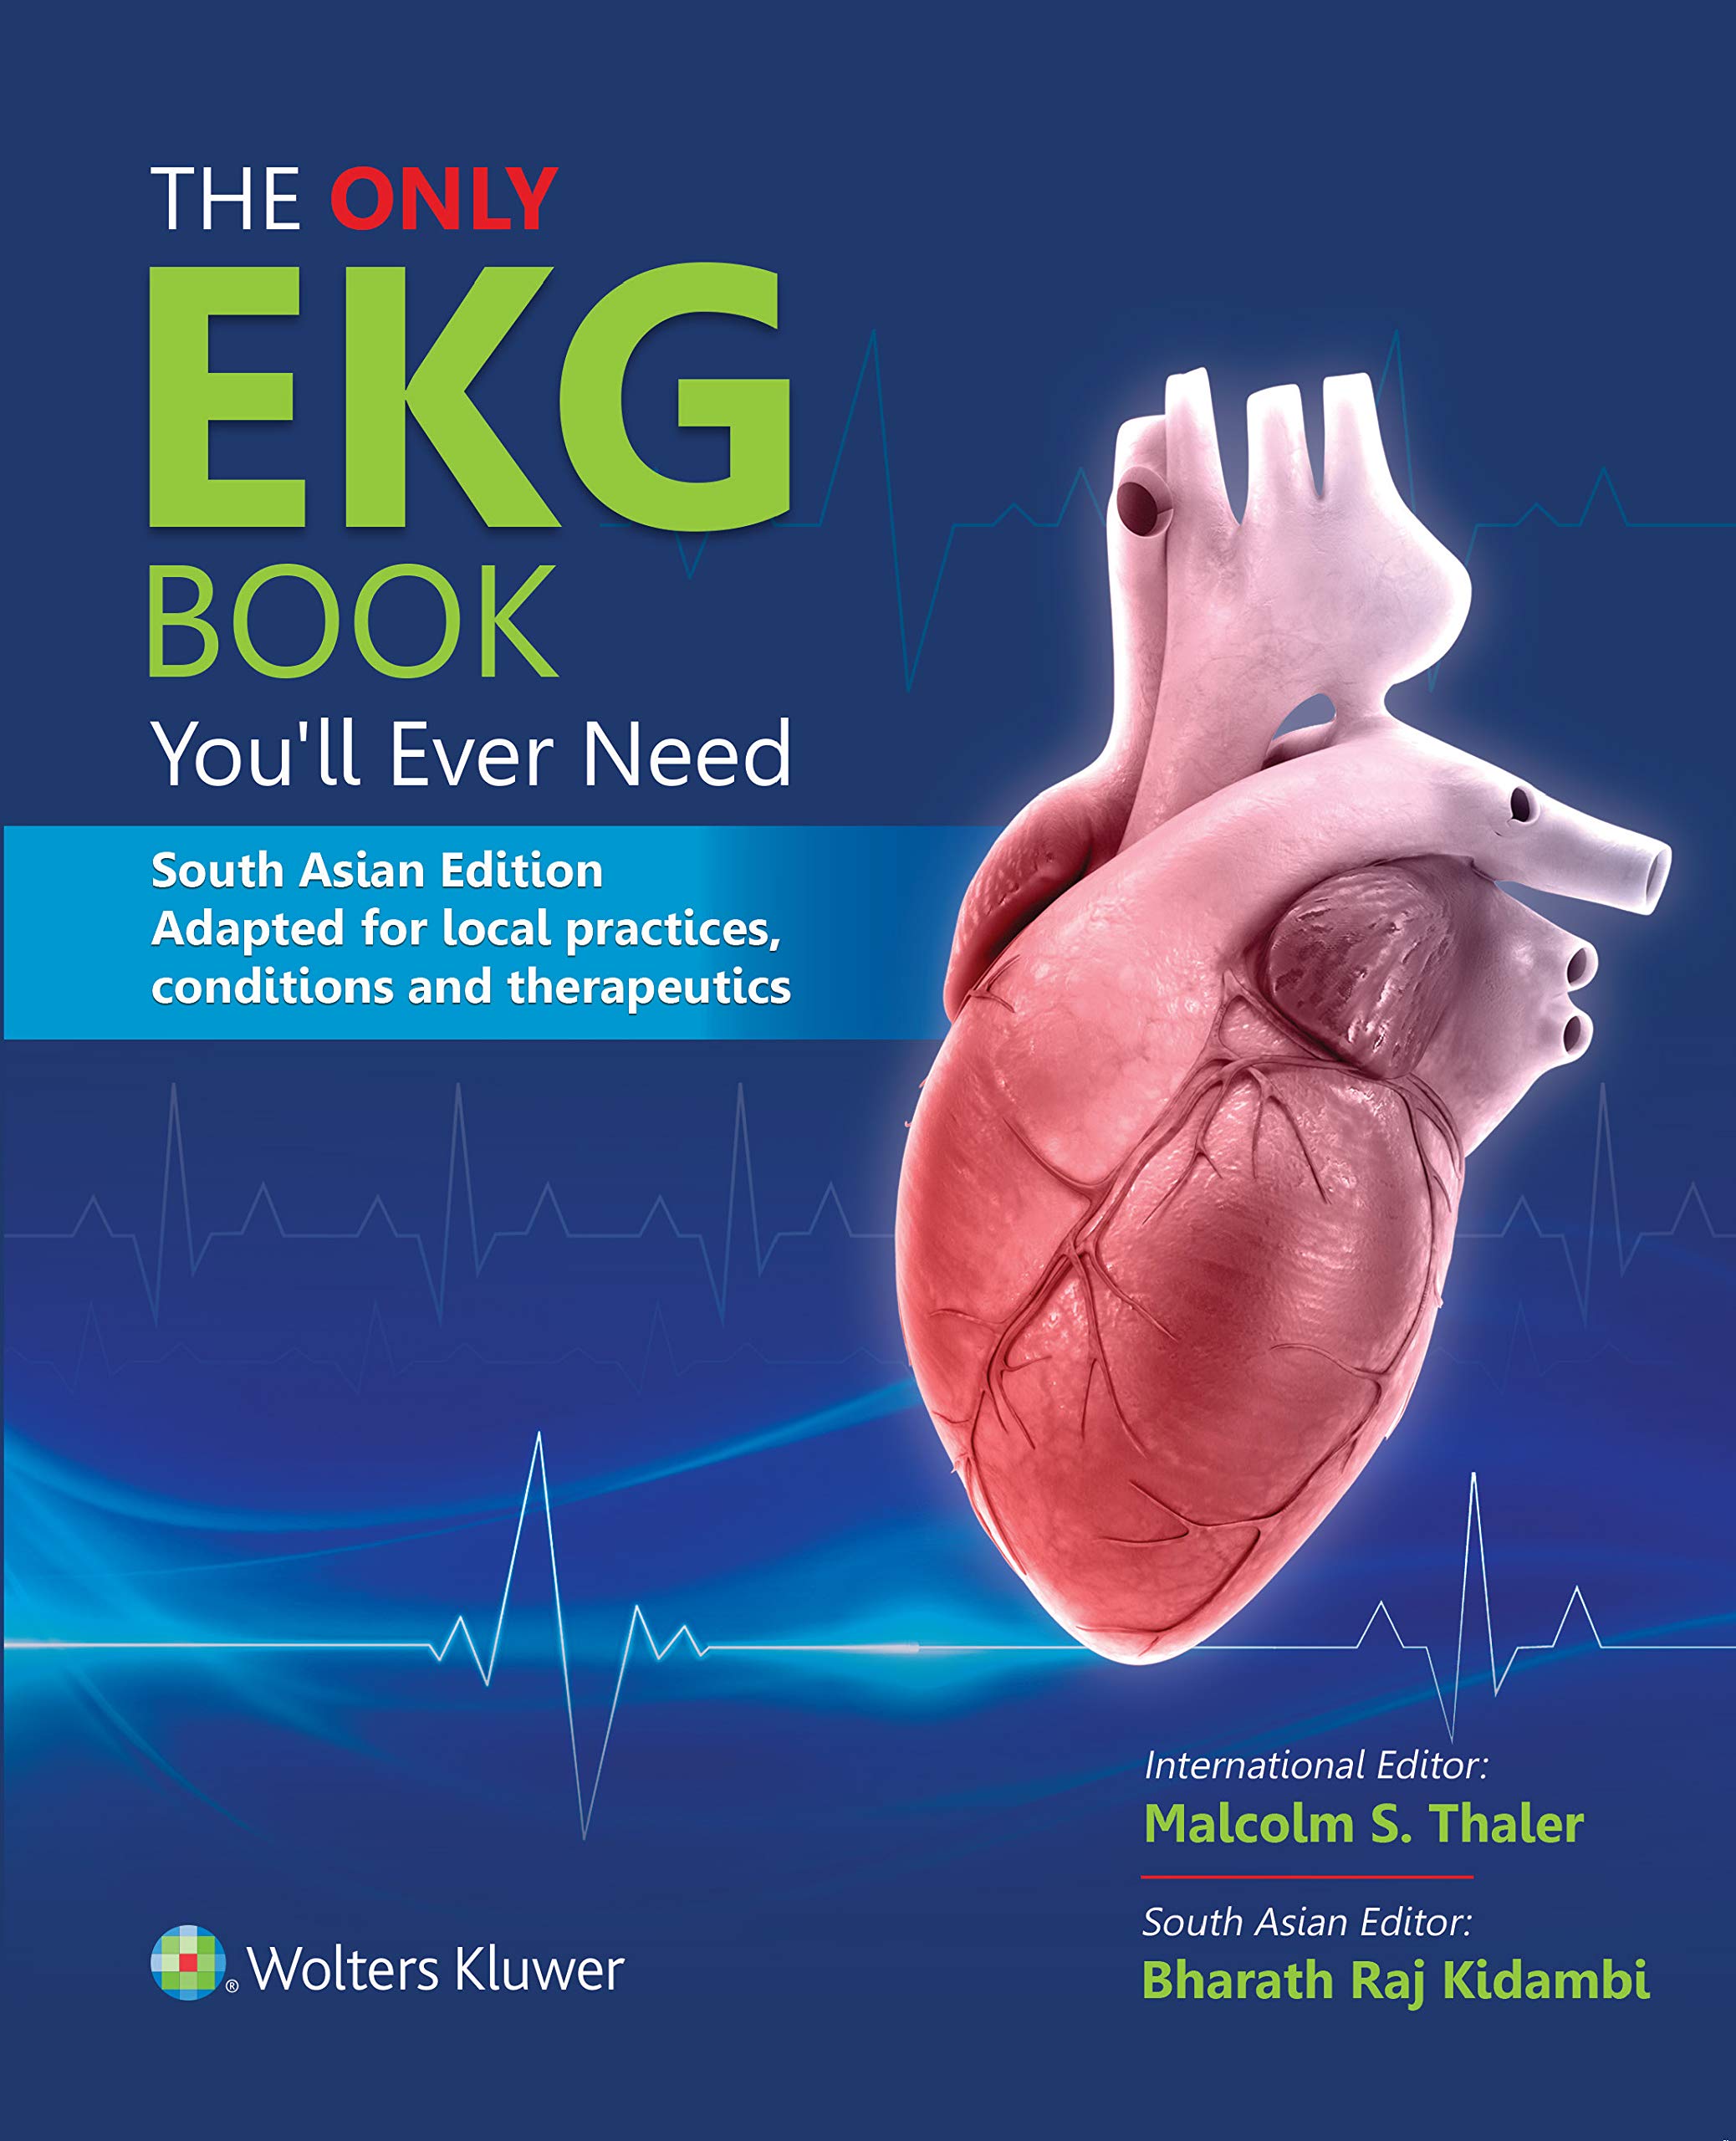 The only EKG Books You'll Ever Need